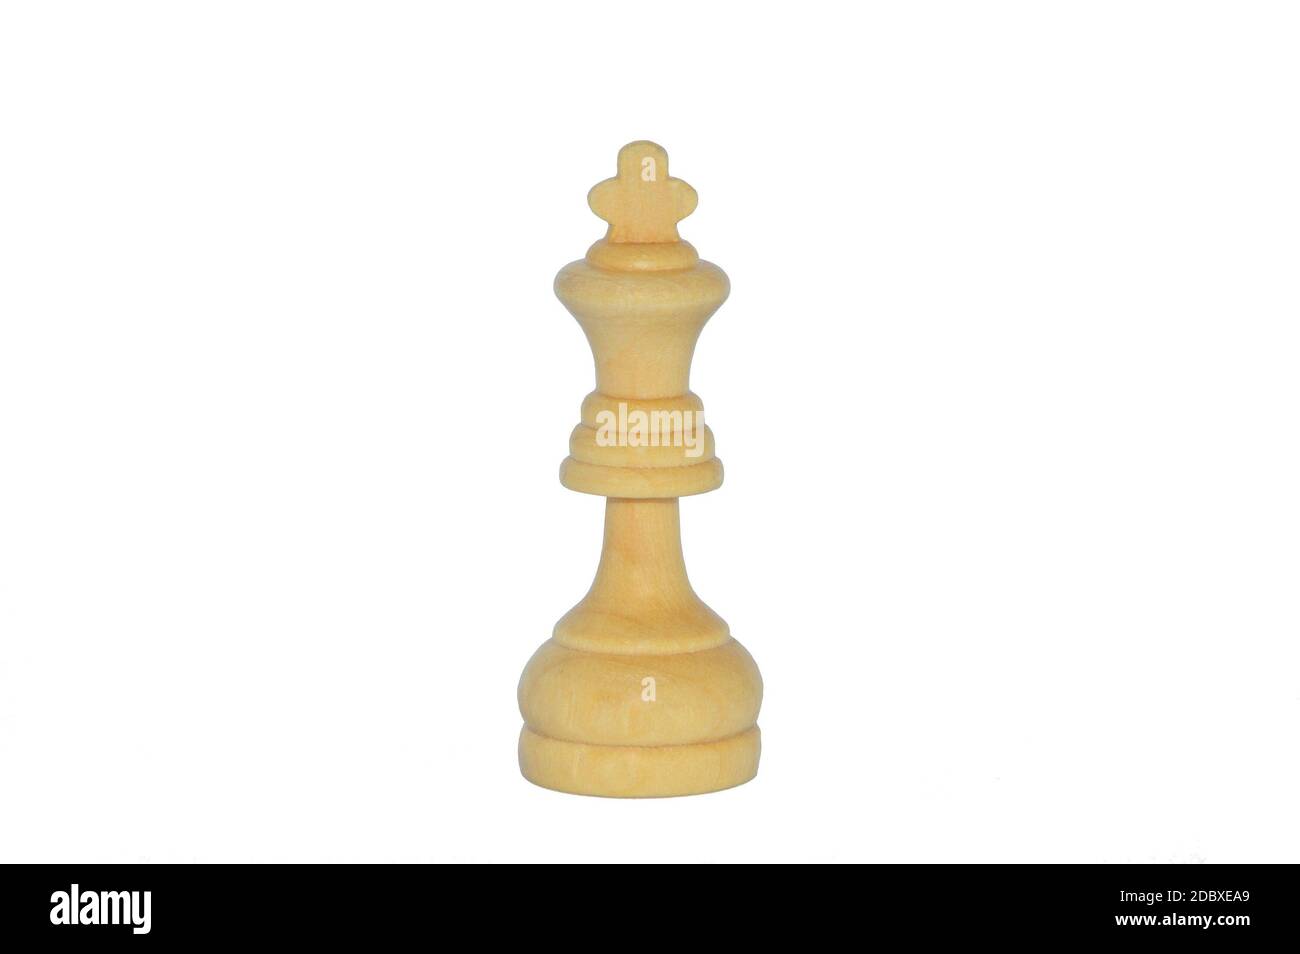 Wooden chess piece of white king isolated on white background Stock ...